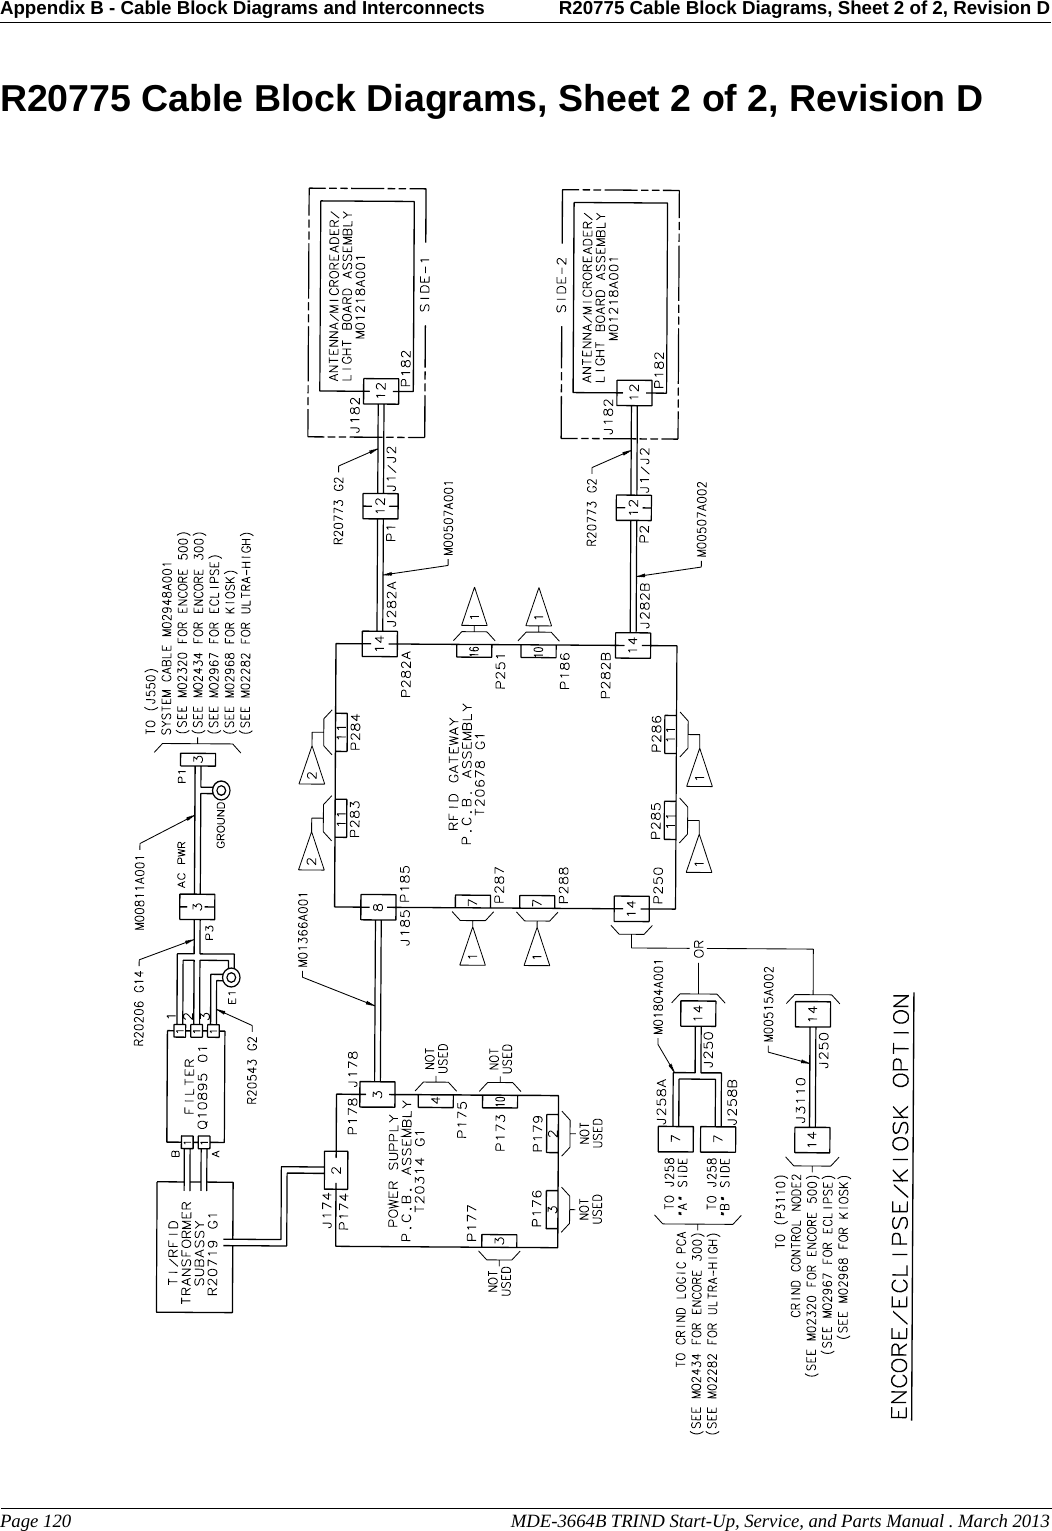 Appendix B - Cable Block Diagrams and Interconnects R20775 Cable Block Diagrams, Sheet 2 of 2, Revision DPage 120                                                                                                  MDE-3664B TRIND Start-Up, Service, and Parts Manual . March 2013PreliminaryR20775 Cable Block Diagrams, Sheet 2 of 2, Revision D